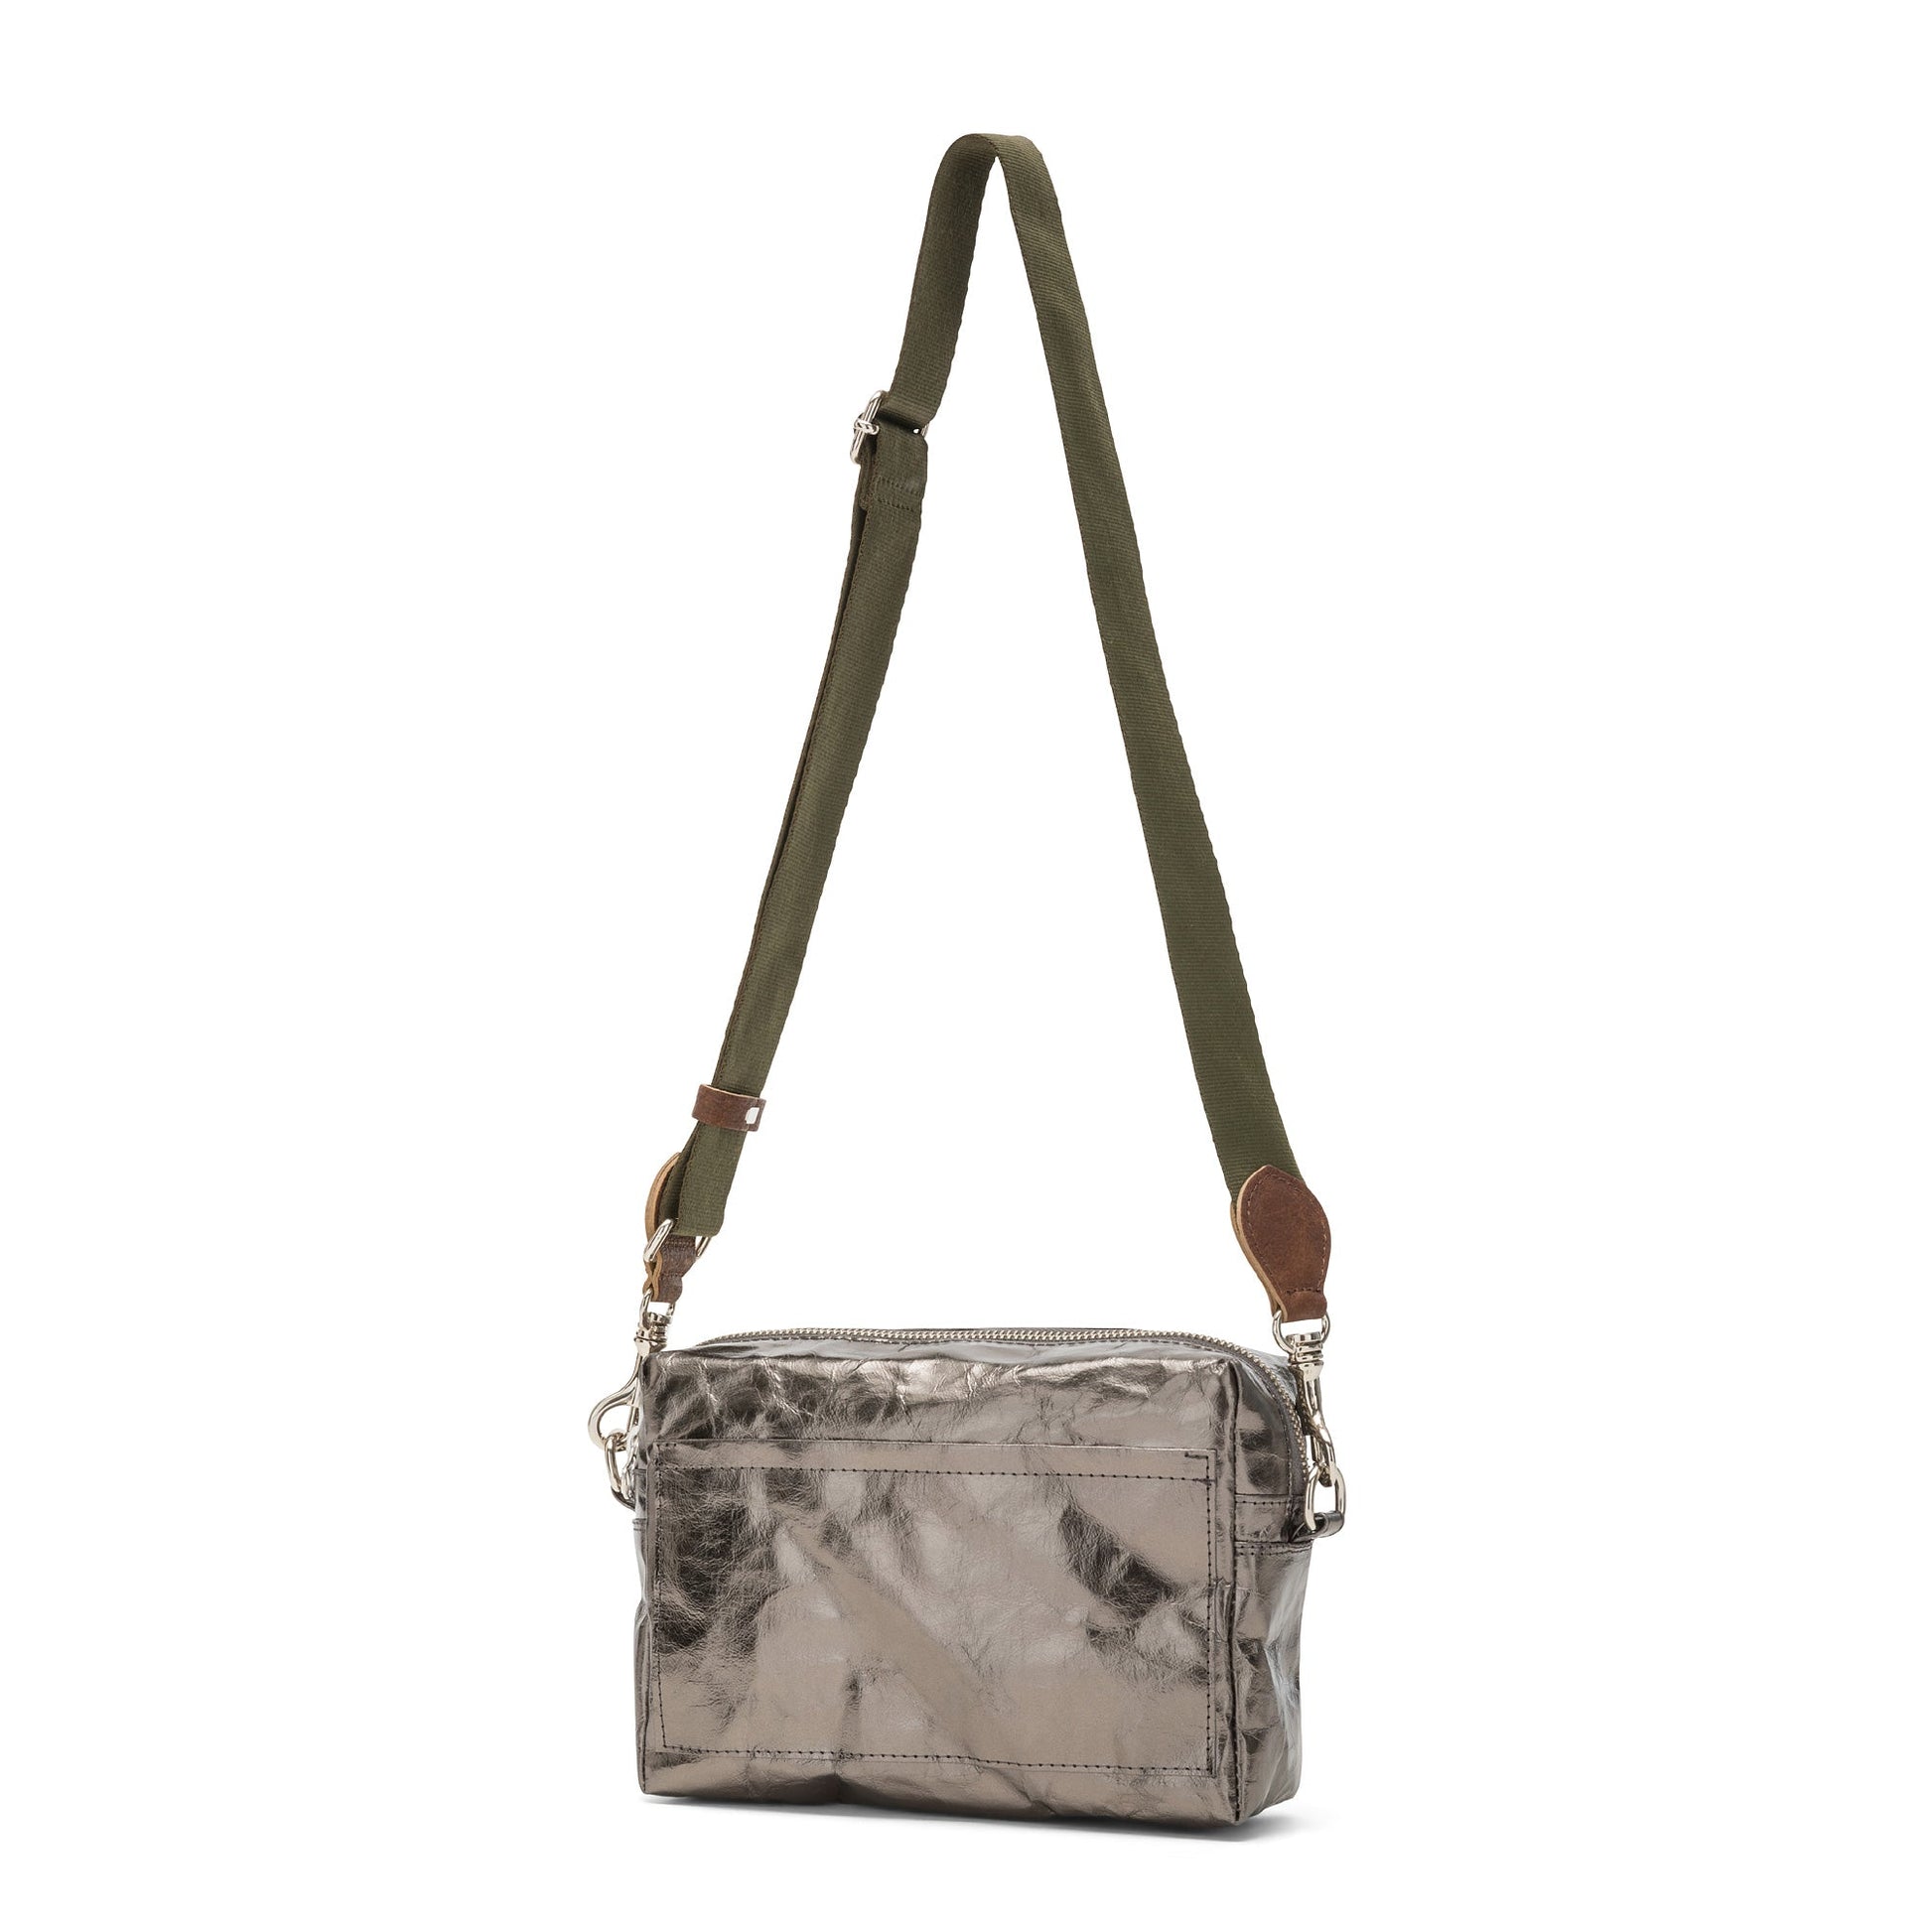 A rectangular washable paper handbag with an external side pocket is shown. The bag has a canvas strap, washable paper details and metal fastening clips to attach the straps to the bag. The bag closes by a zip. The bag shown is metallic dark grey with an olive strap.